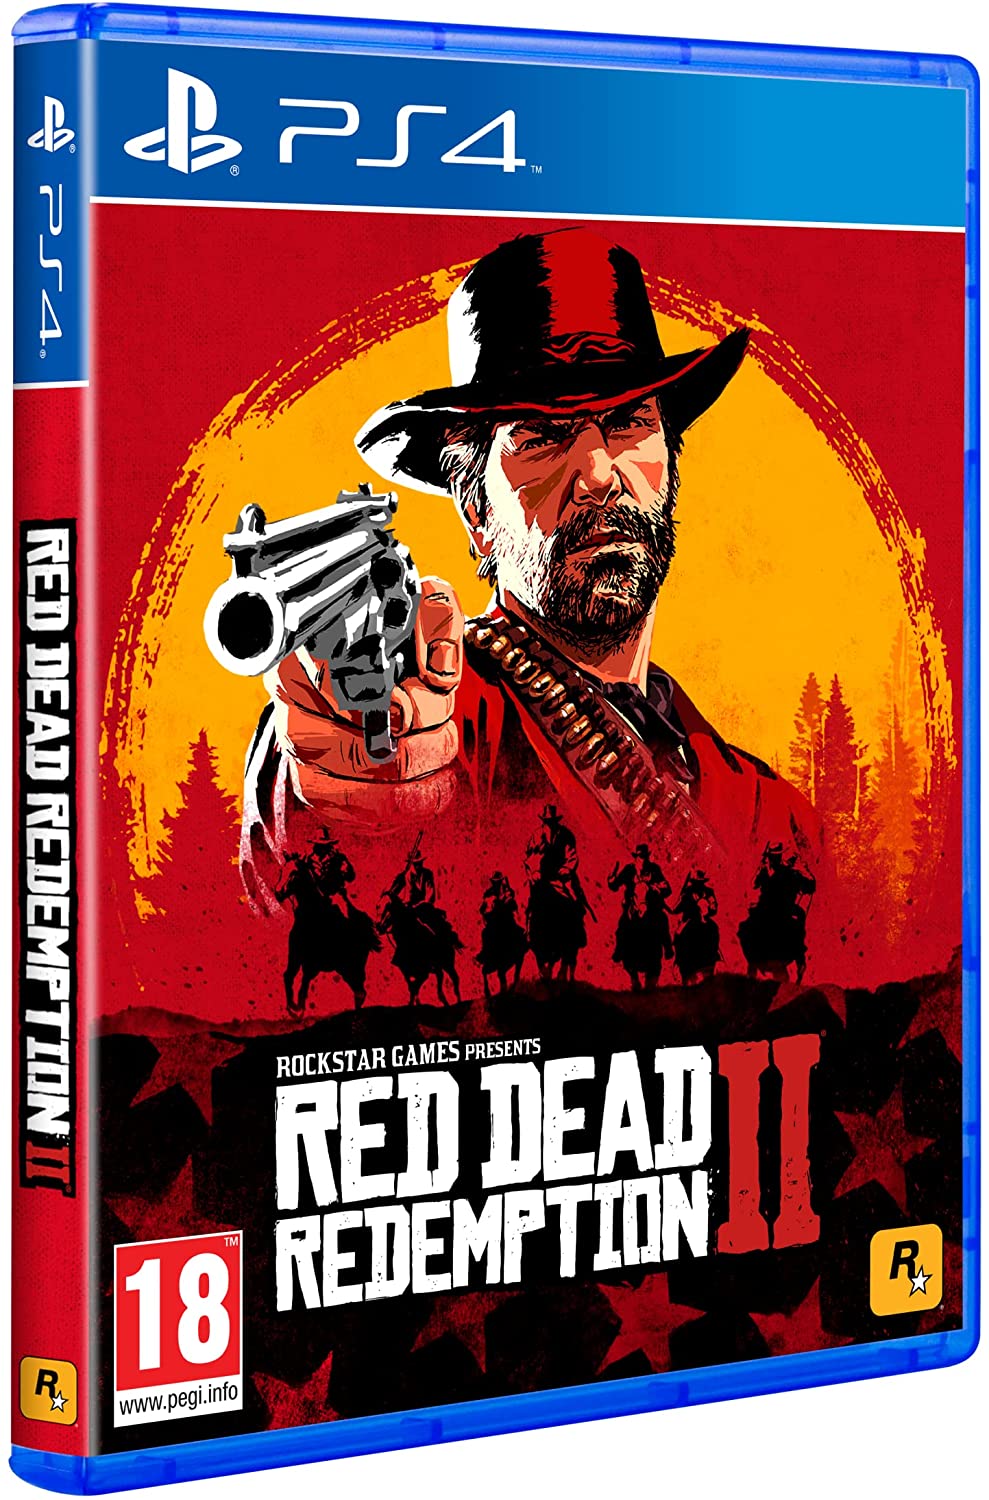 Ред дем 2. Red Dead Redemption 2 ps4. Диск РДР 2 пс4. Red Dead Redemption 2 на пс4. Rdr 2 ps4 диск.